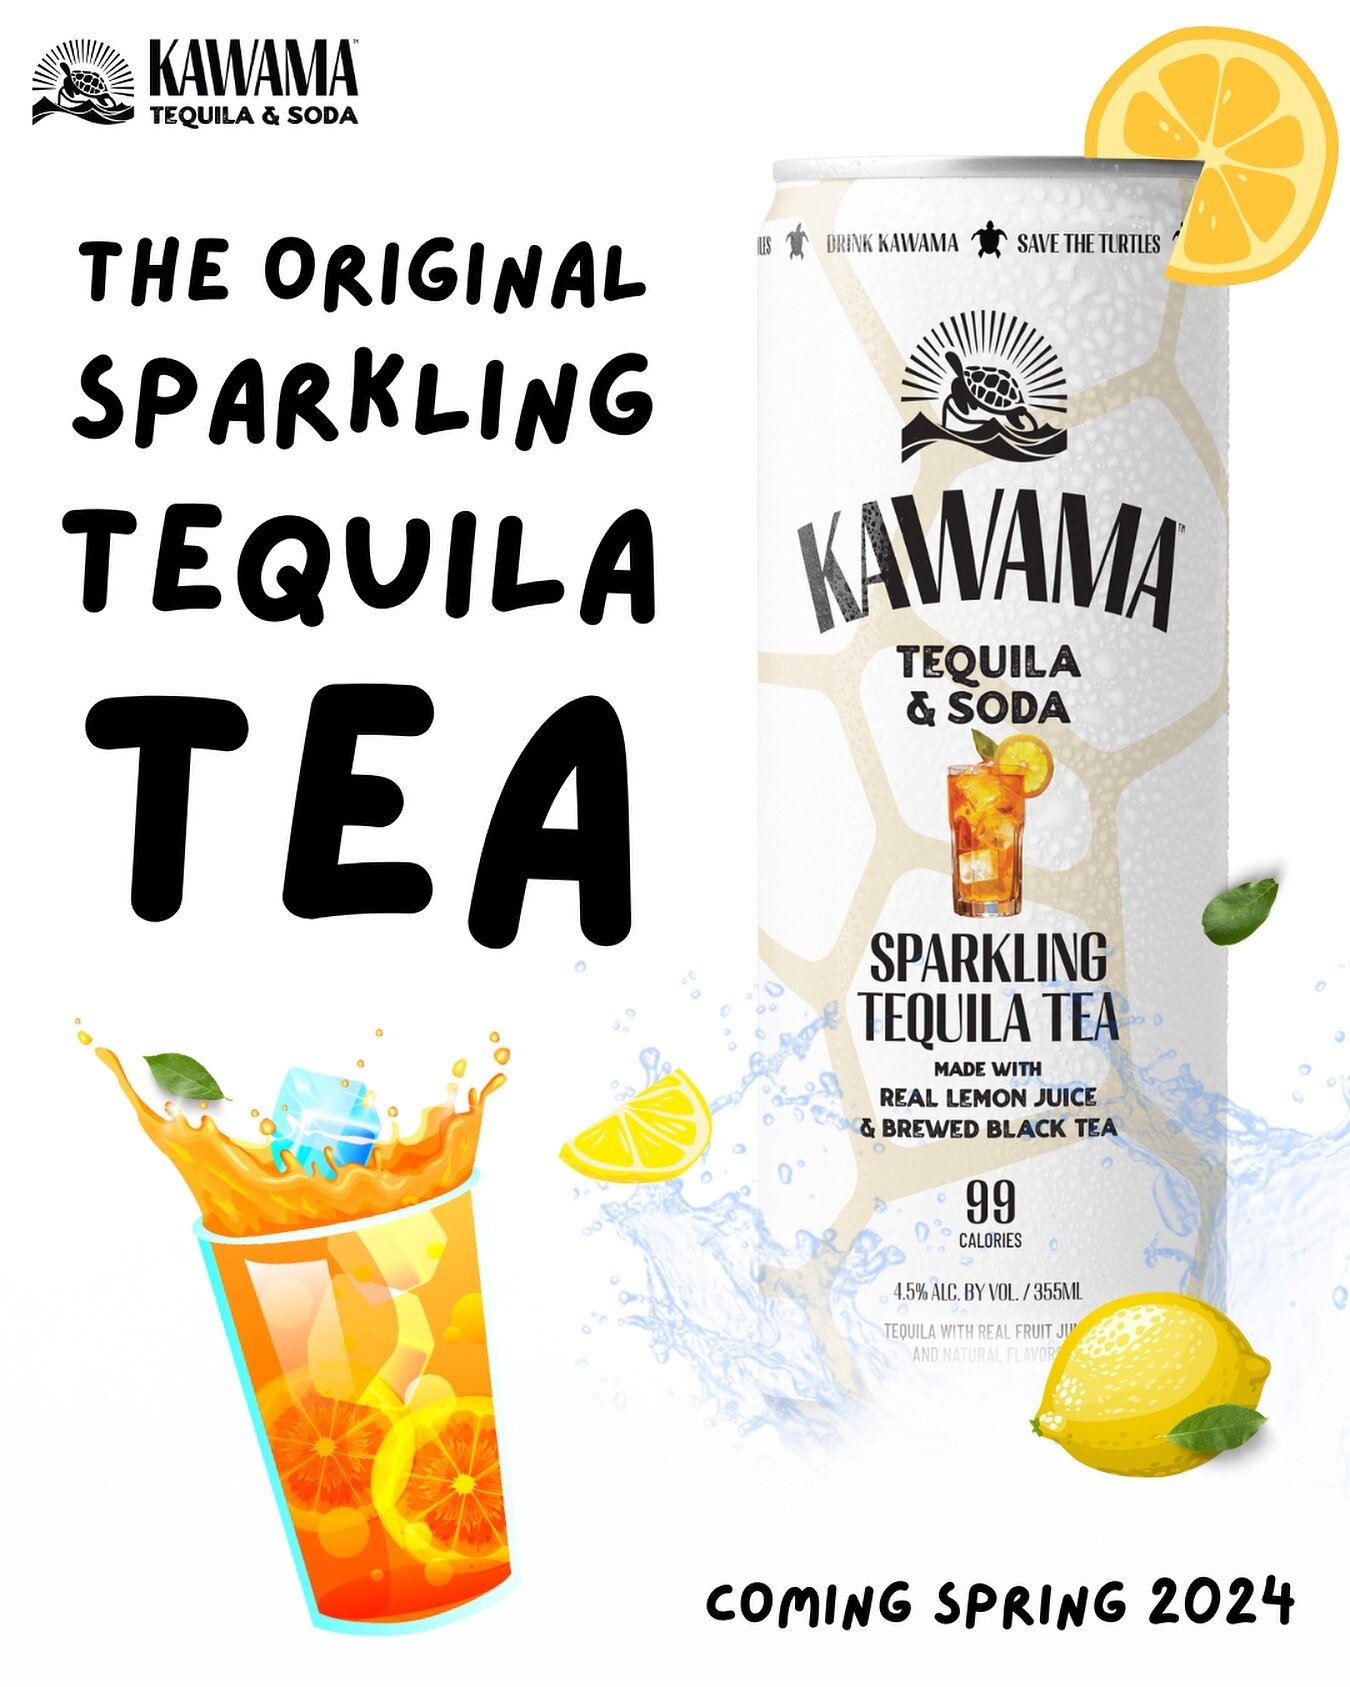 ONE OF ONE. Introducing the ORIGINAL SPARKLING TEQUILA TEA!! Inspired by one of our favorite refreshing drinks, the classic half n half, we decided it needed some tequila! 

Kawama Sparkling Tequila Tea is lightly carbonated and made with brewed blac